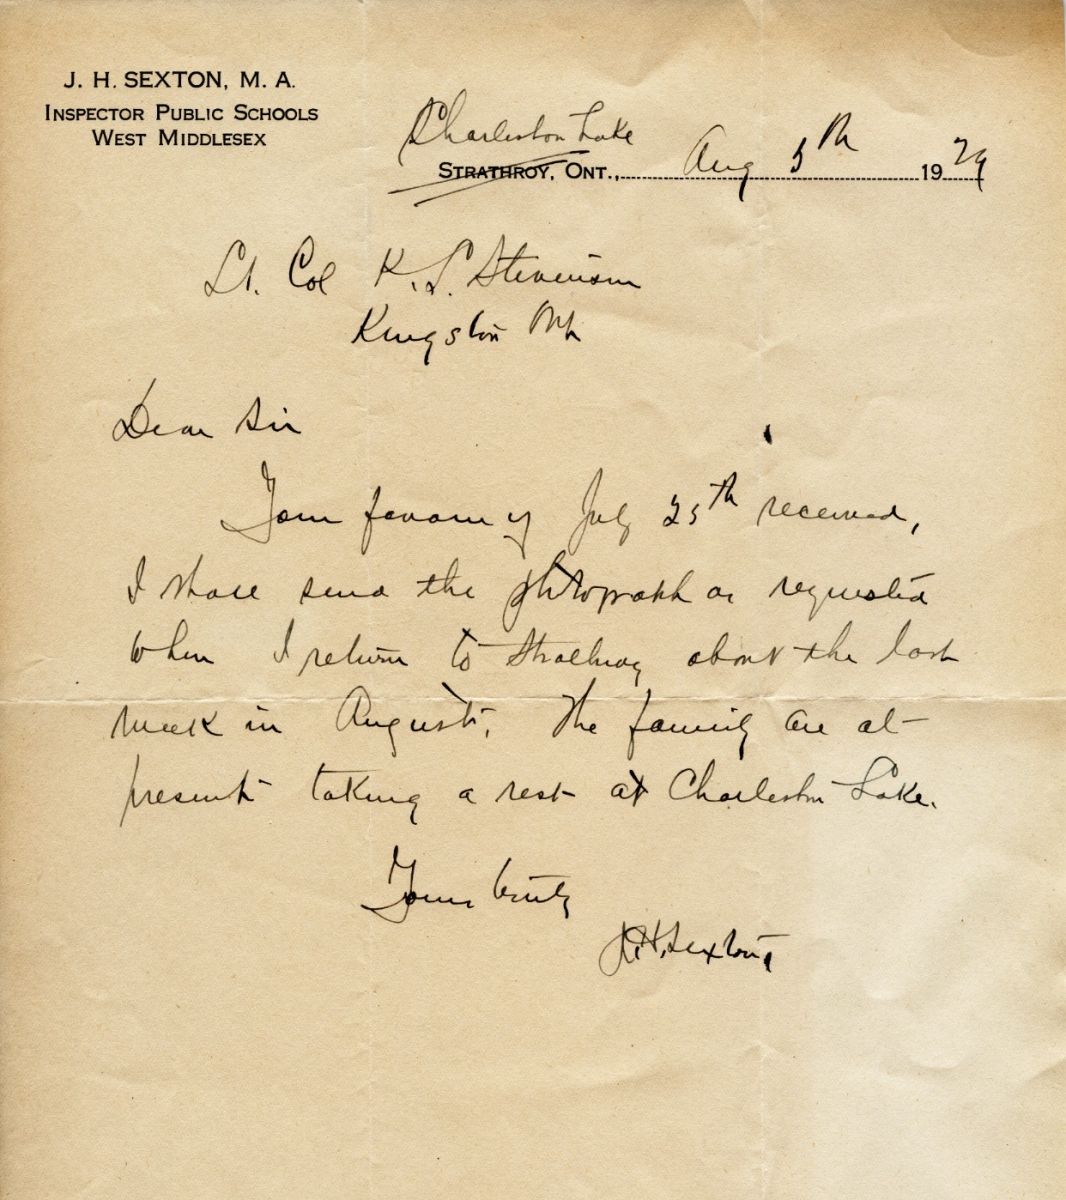 Letter from J.H. Sexton to Lt. Col. K.L. Stevenson, 5th August 1929